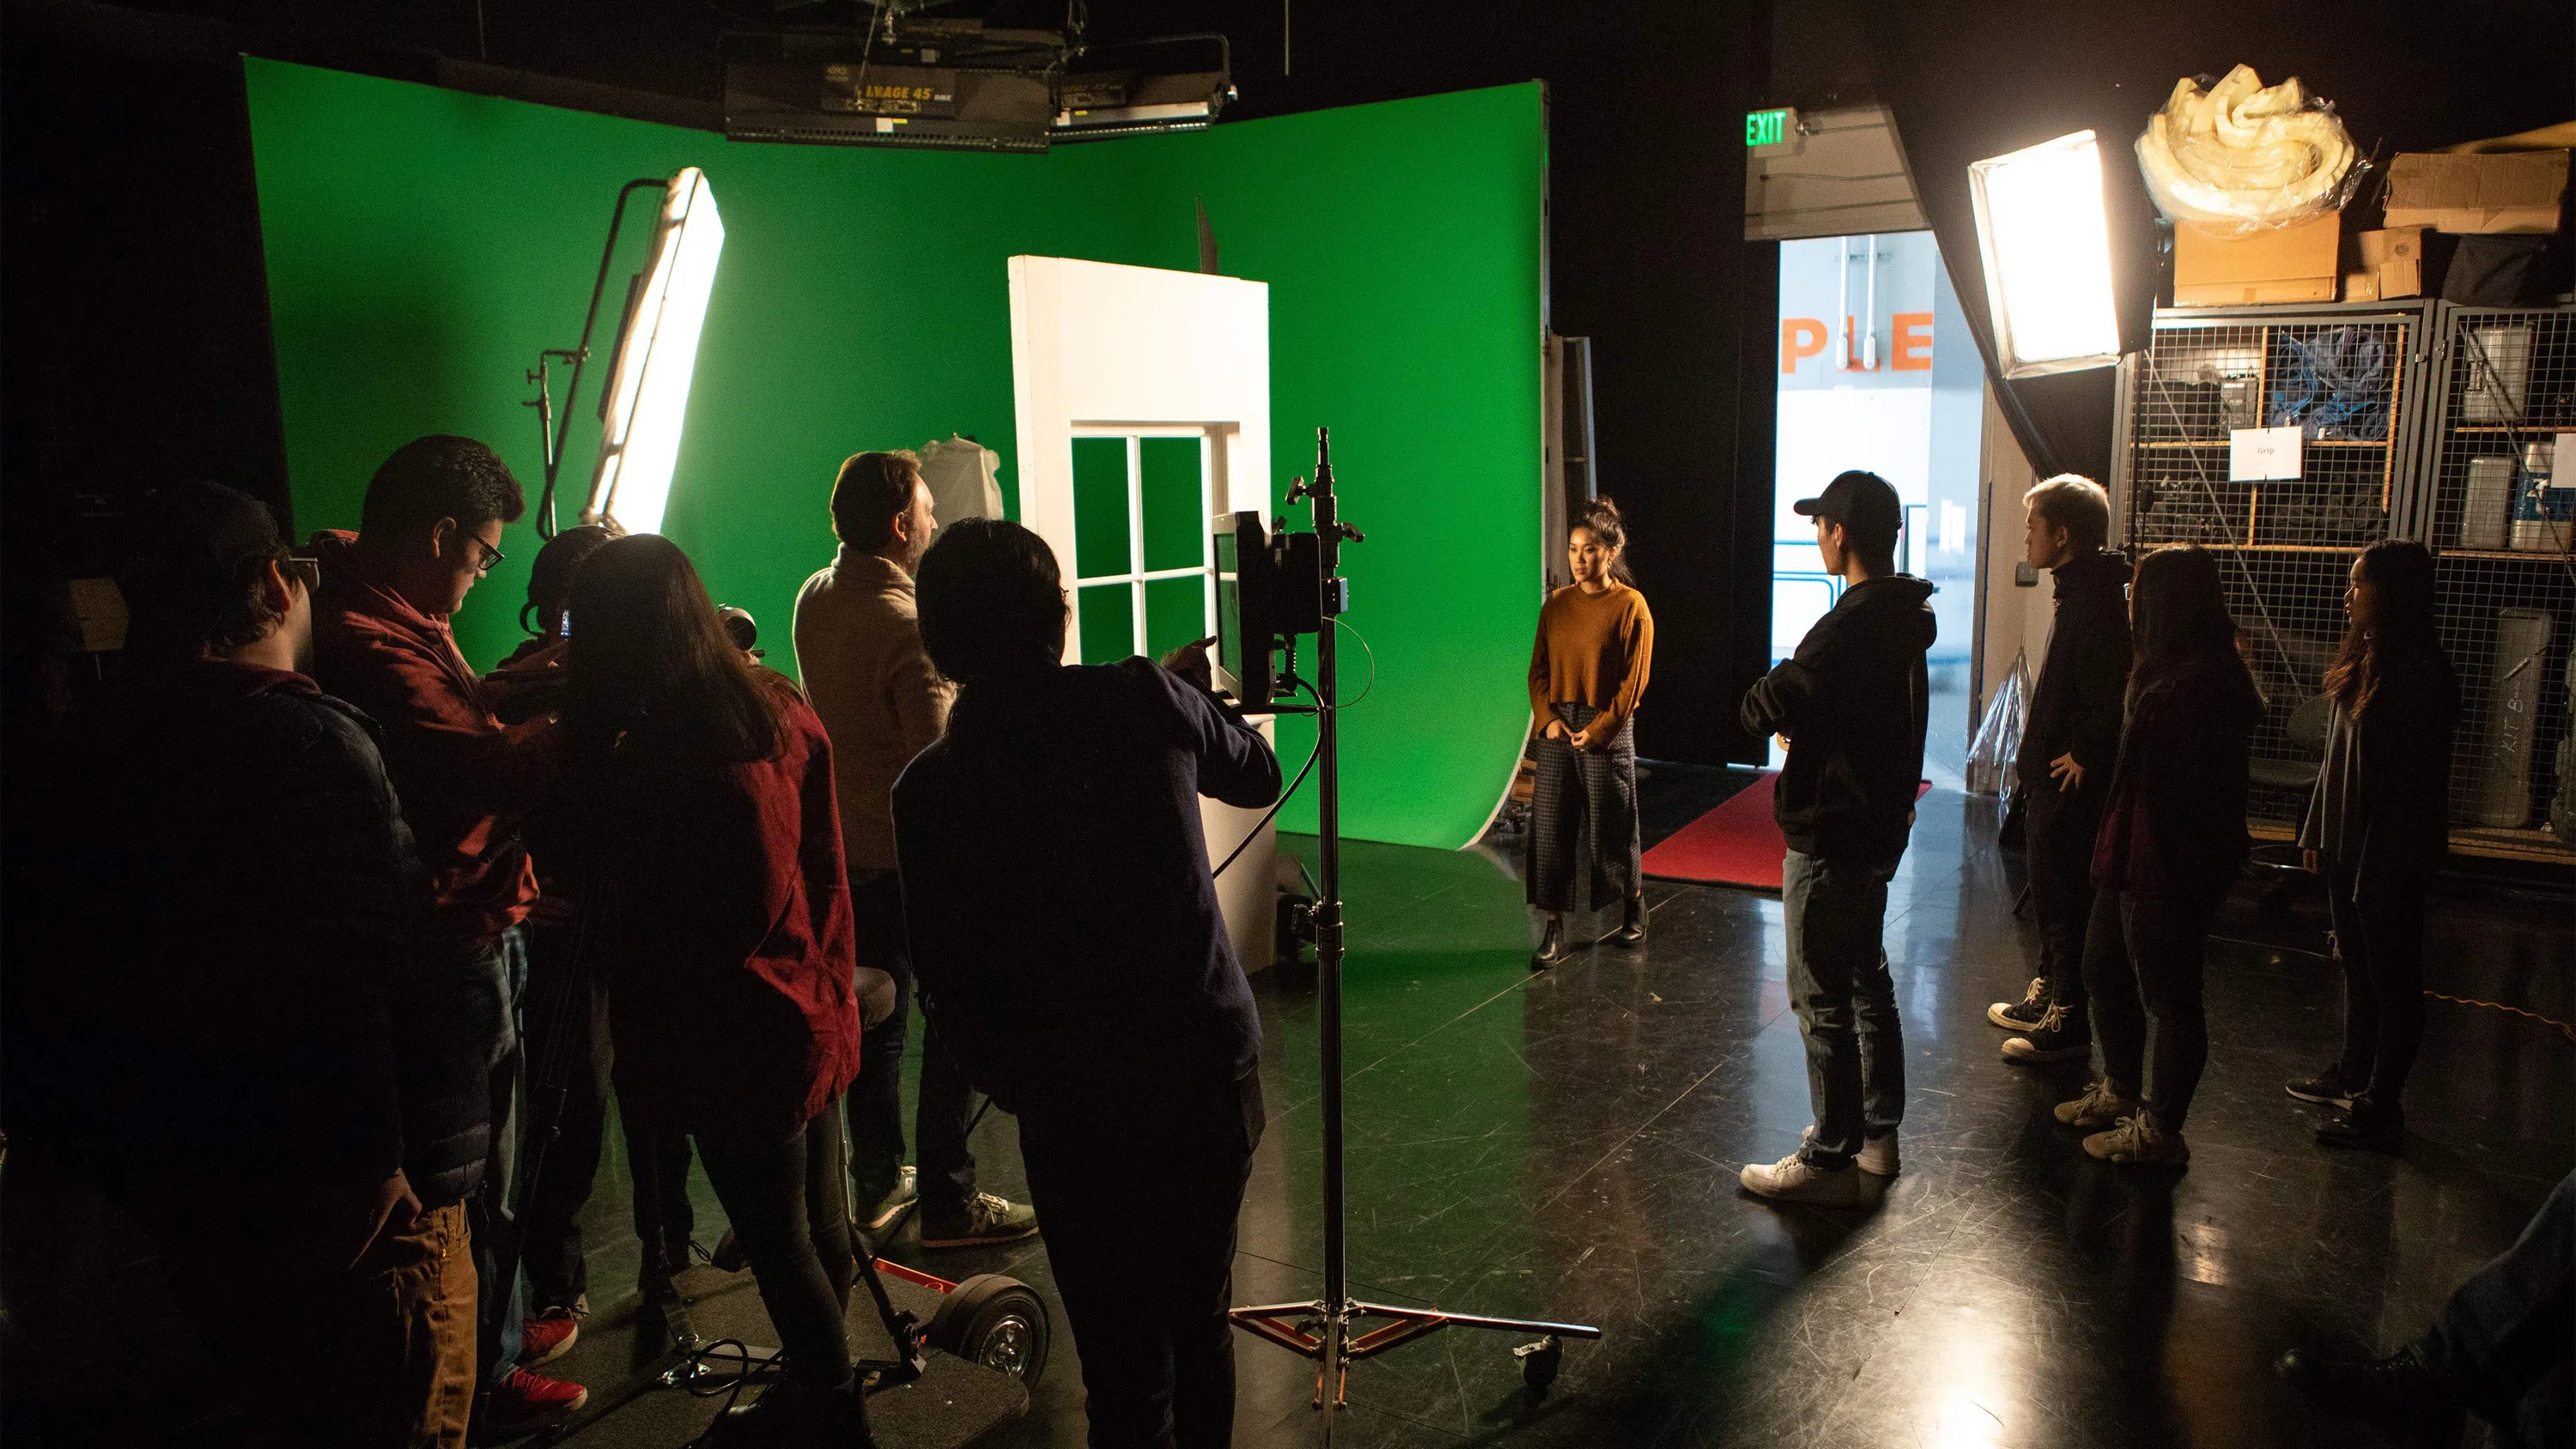 A dozen students stand on the production stage holding film equipment preparing for a shoot.